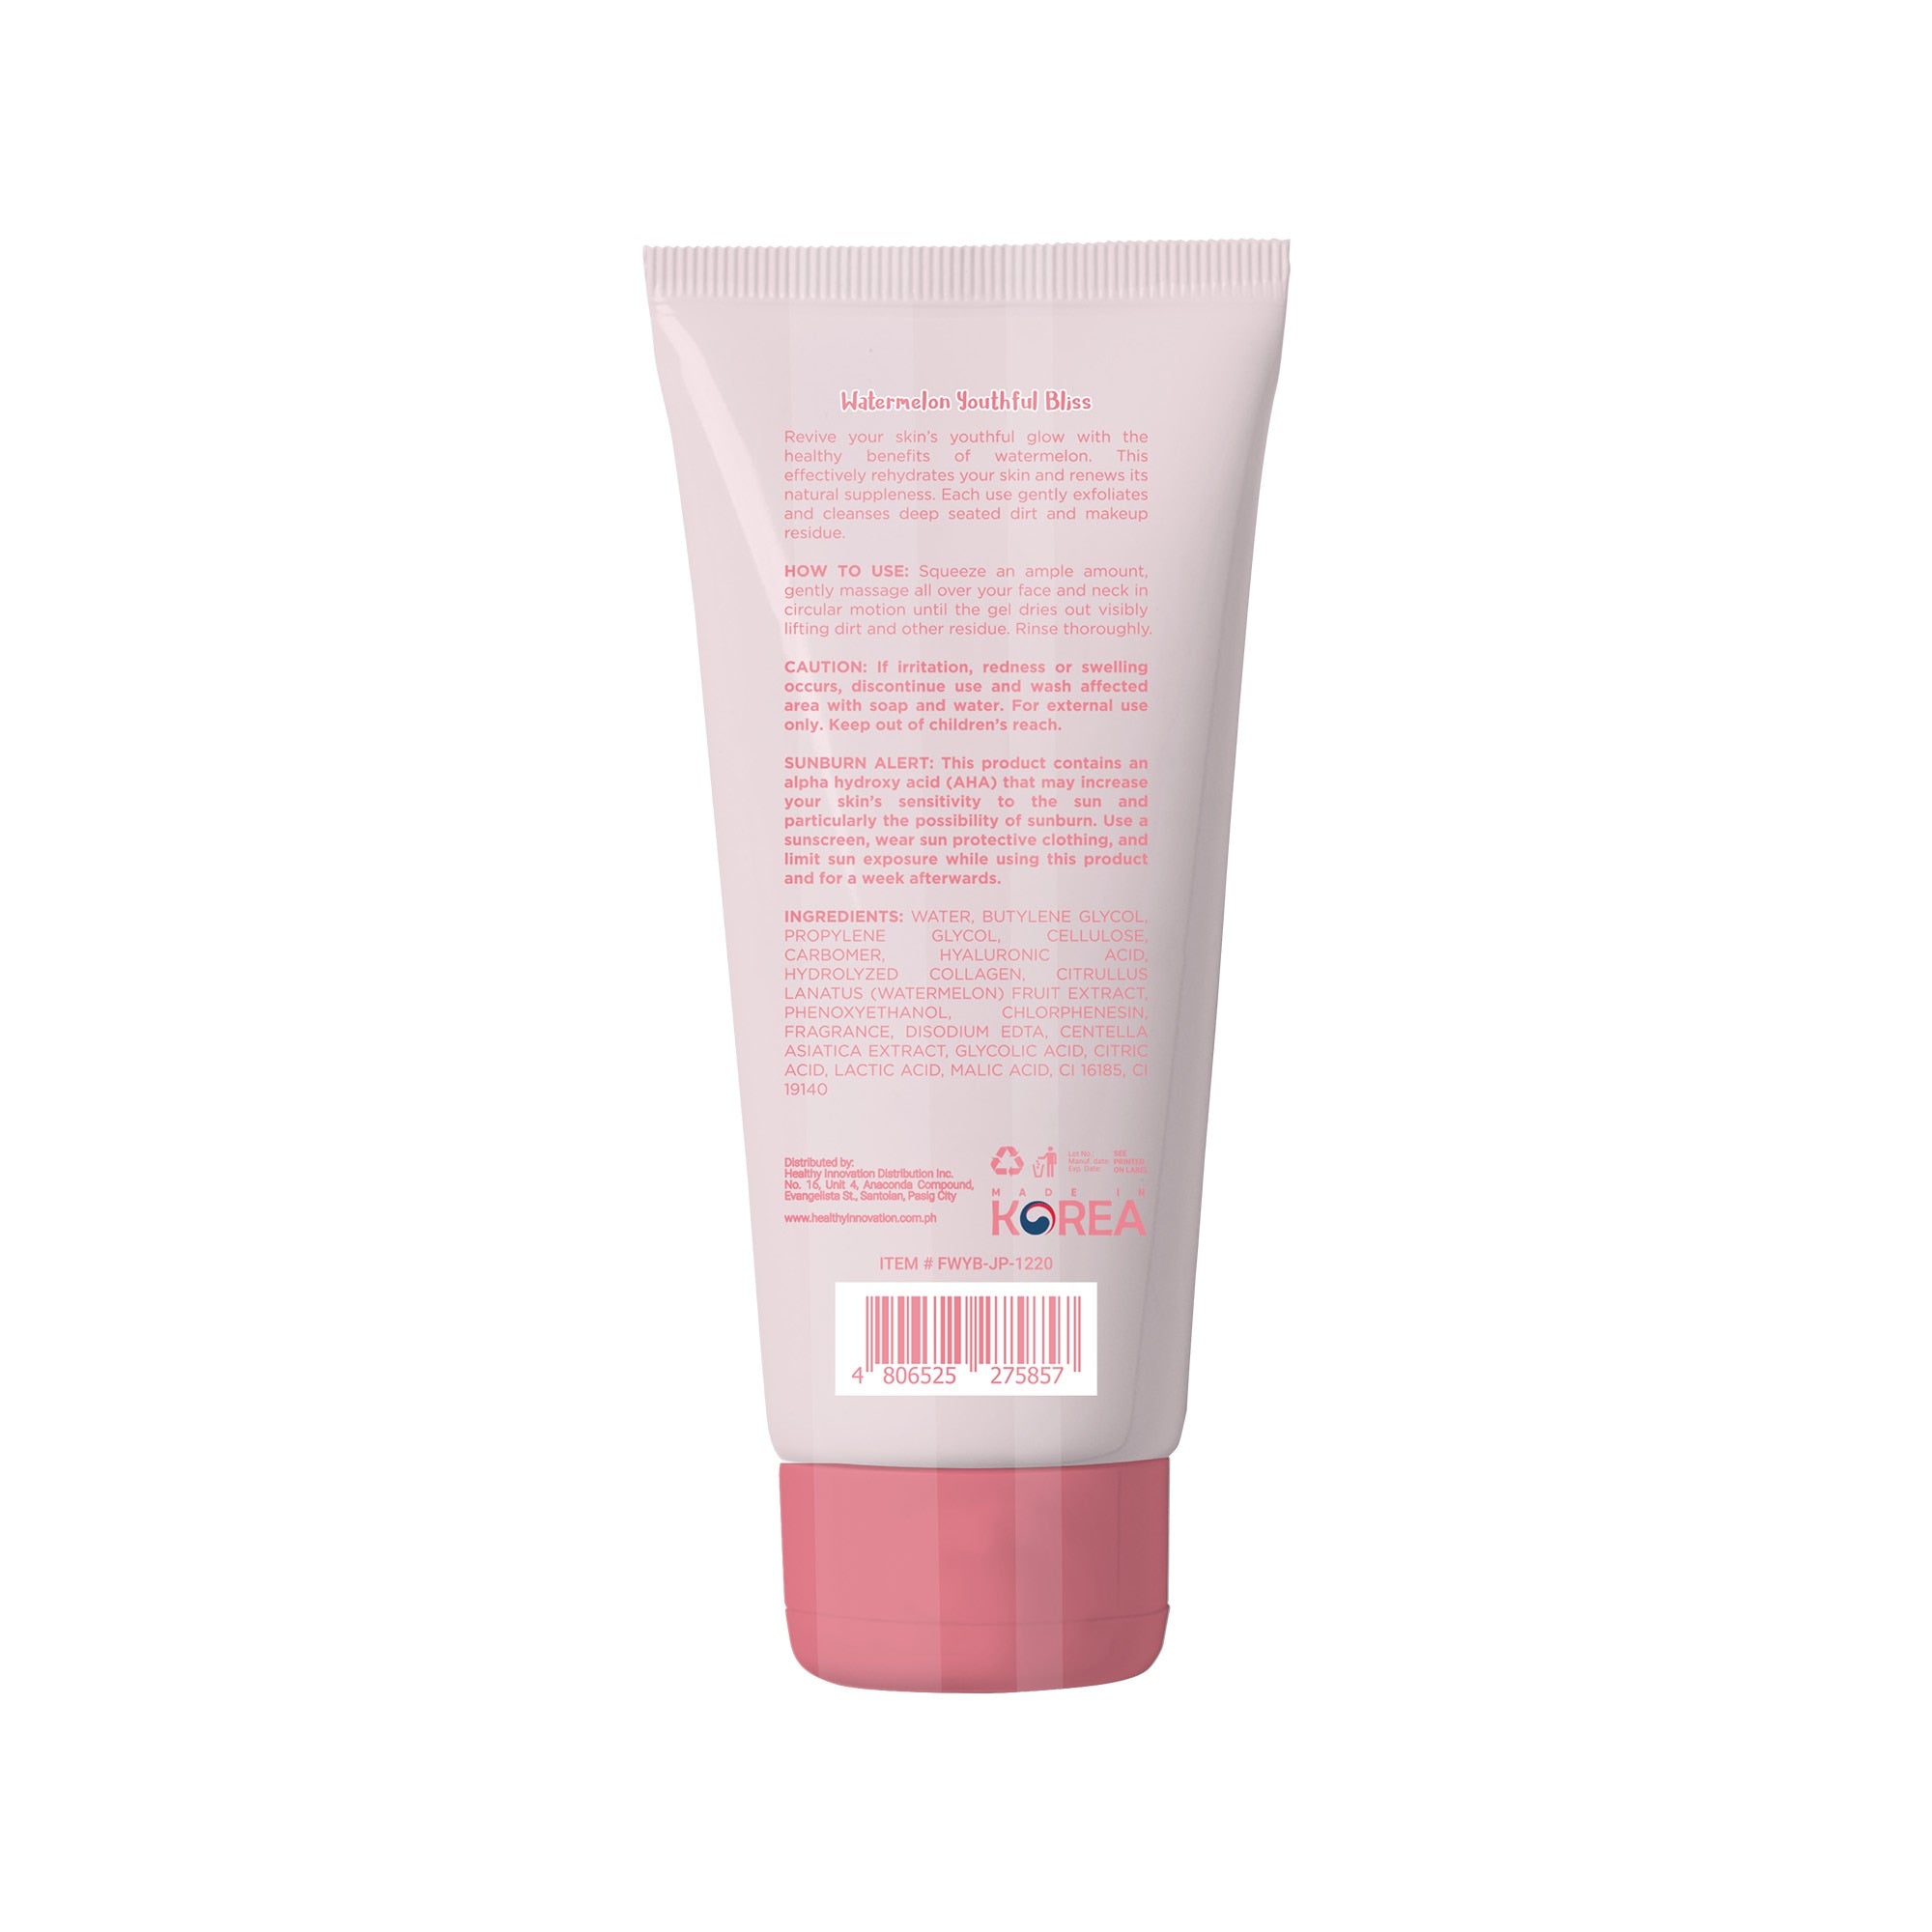 Fresh Skinlab Watermelon Youthful Bliss Jelly Facial Wash 100ml (EXP: MAY 2024)